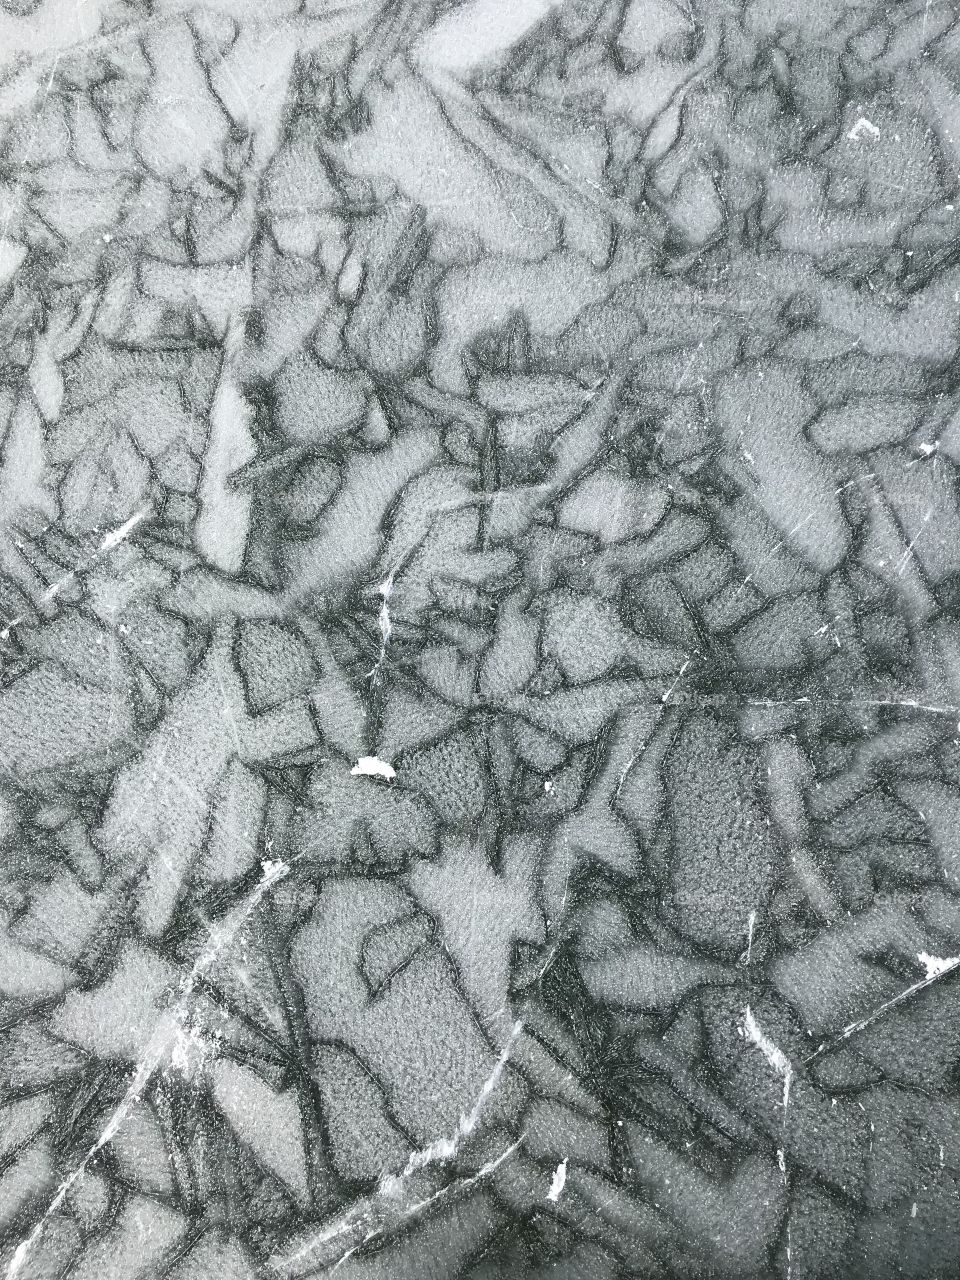 A closeup of the patterns of a frozen lake. Puzzle pieces of white and speckled ice. 